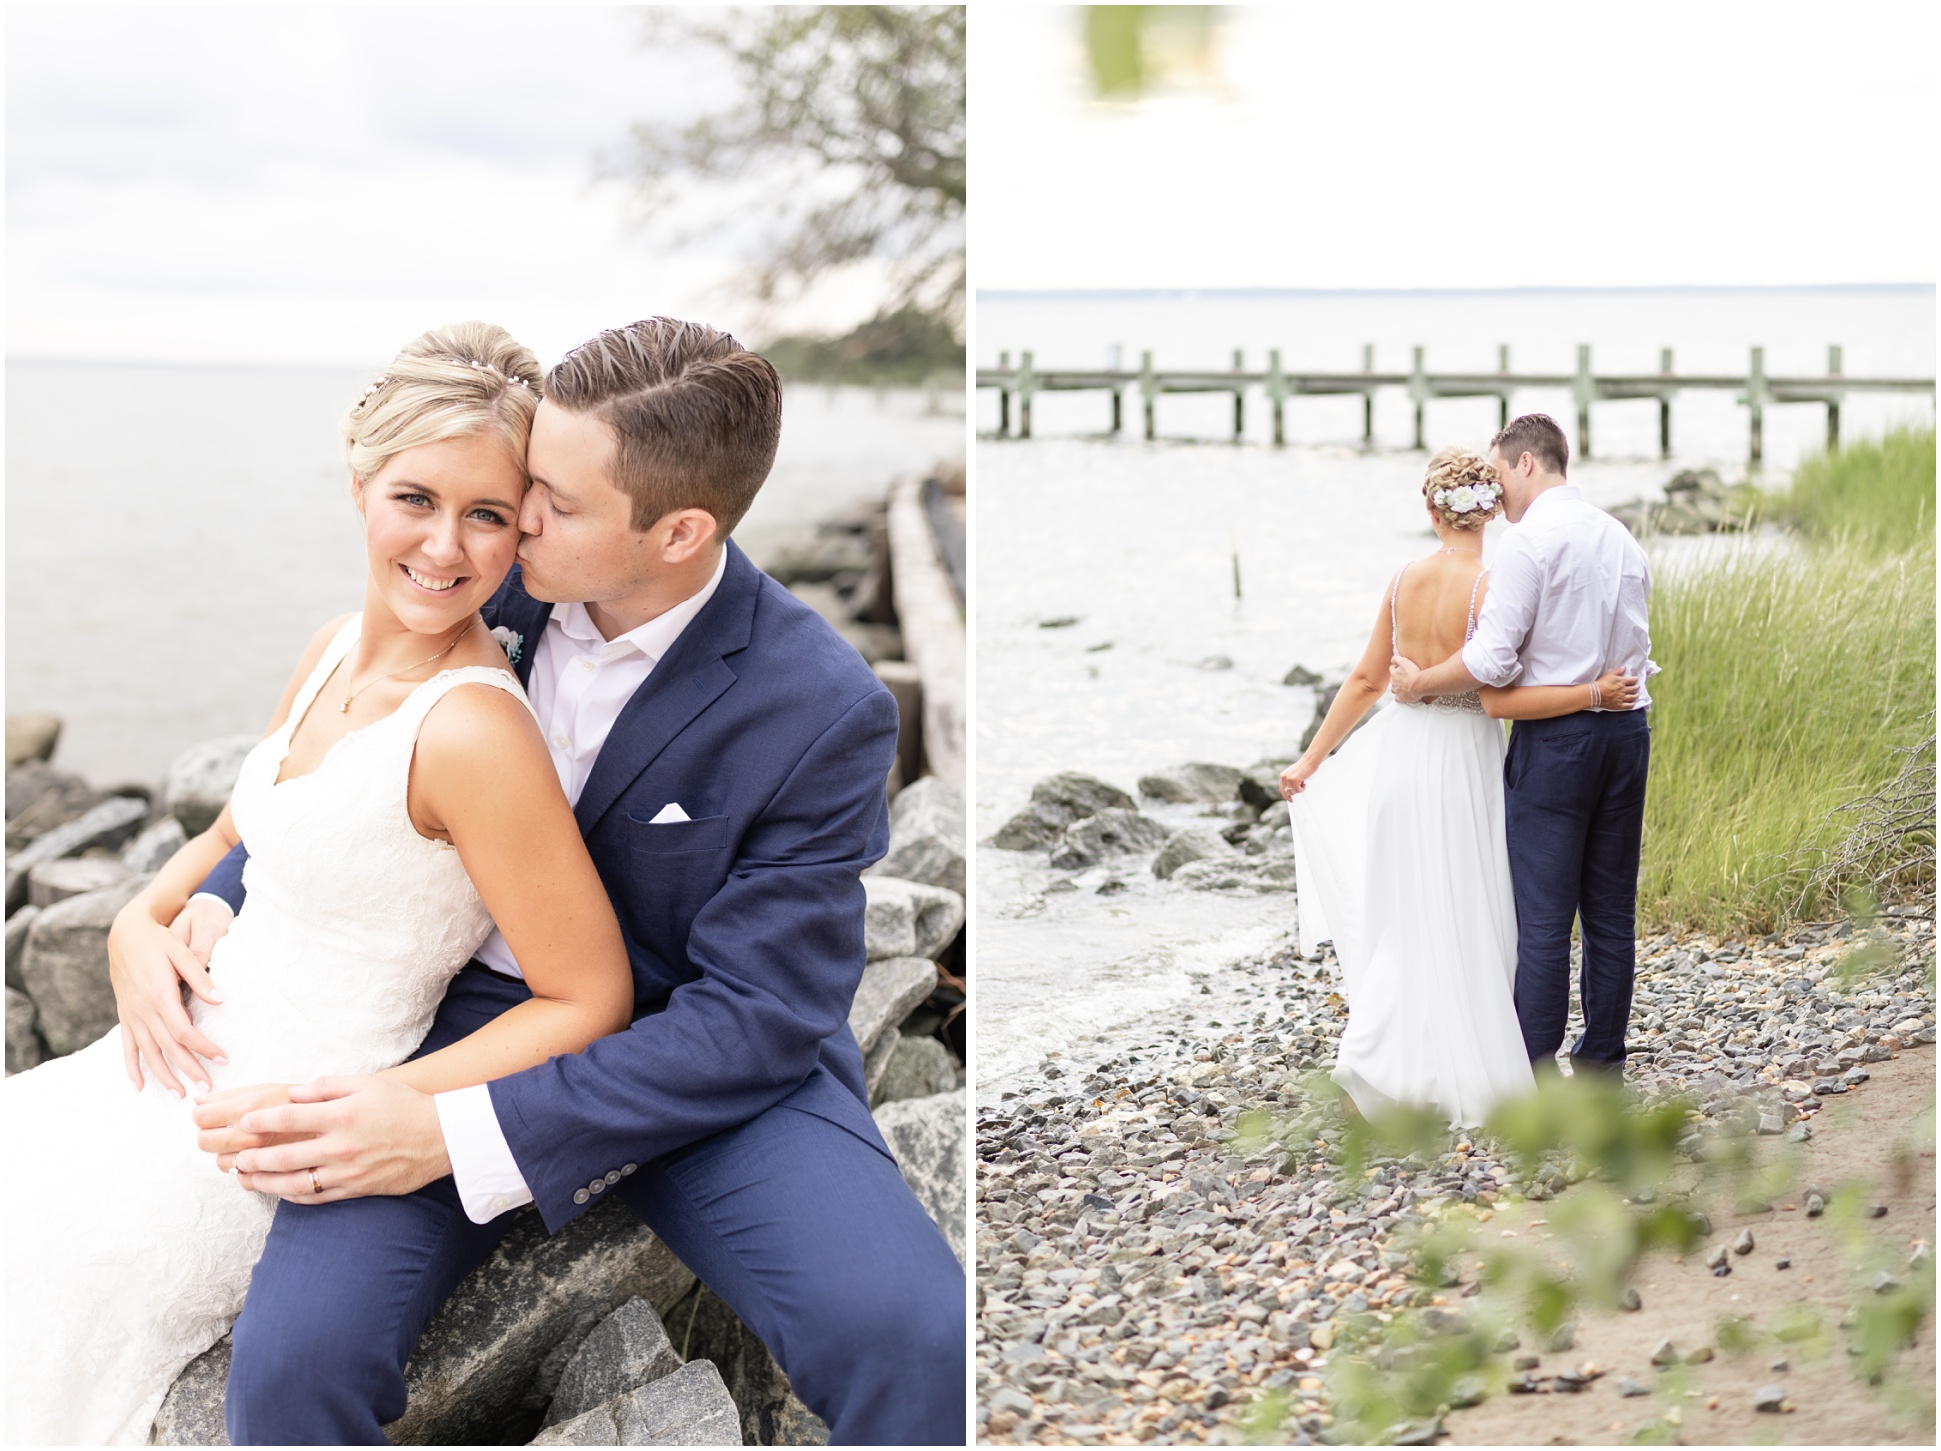 two images of hte bride and groom down on the beach by the rocls